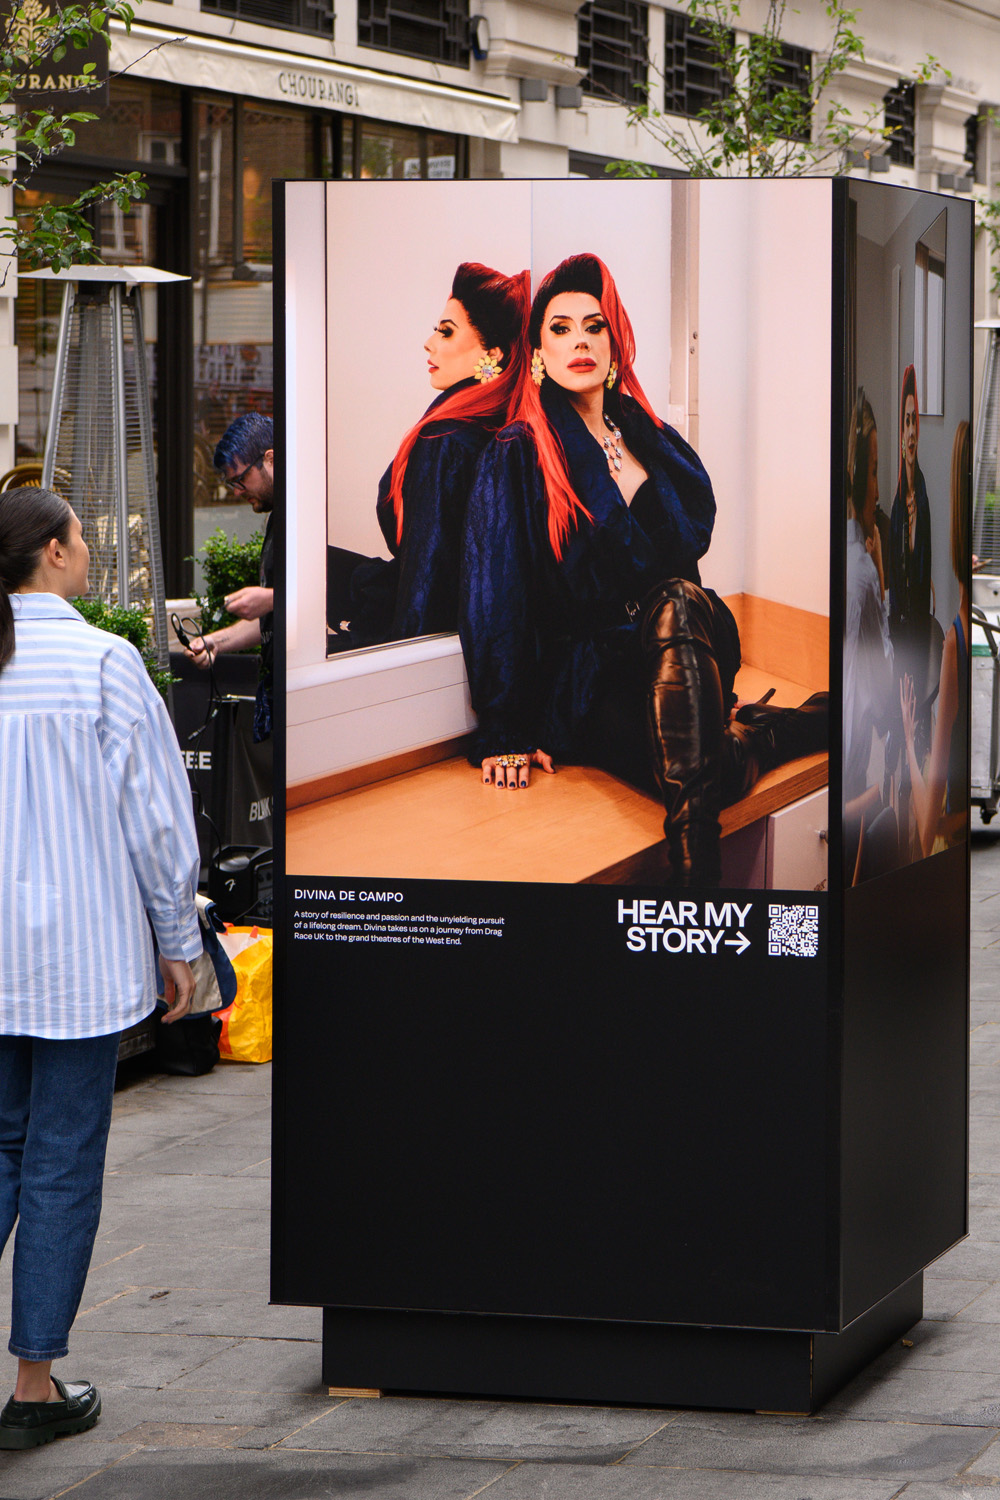 An Immersive LGBTQ+ Exhibition Is Coming To Oxford Street This Summer